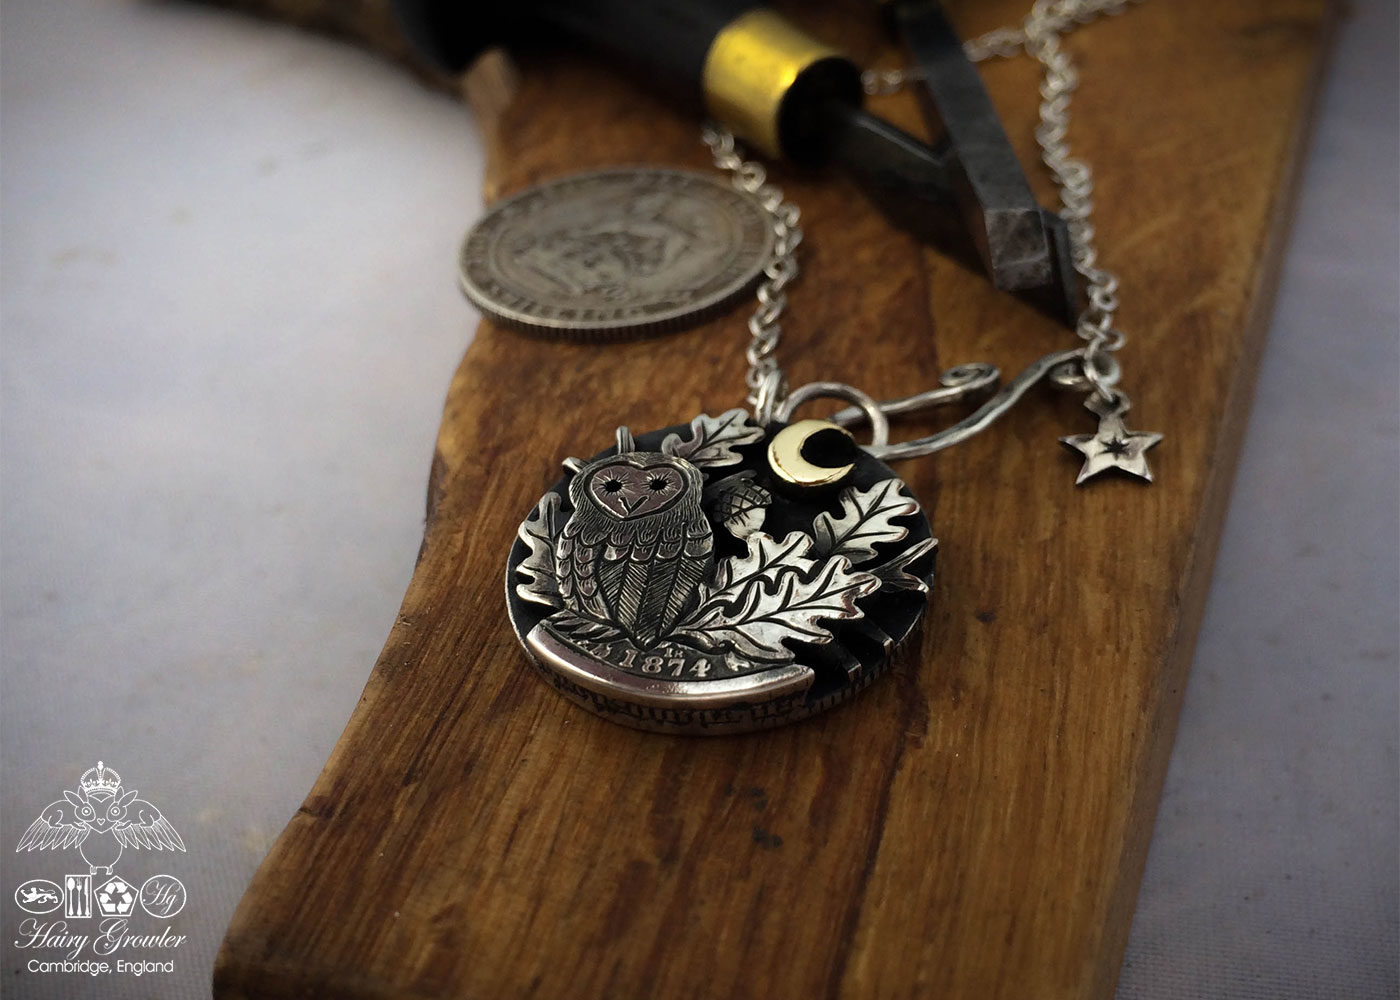 sitting in the moonlight owl necklace handcrafted and recycled from three silver shilling coins all over 100 years old